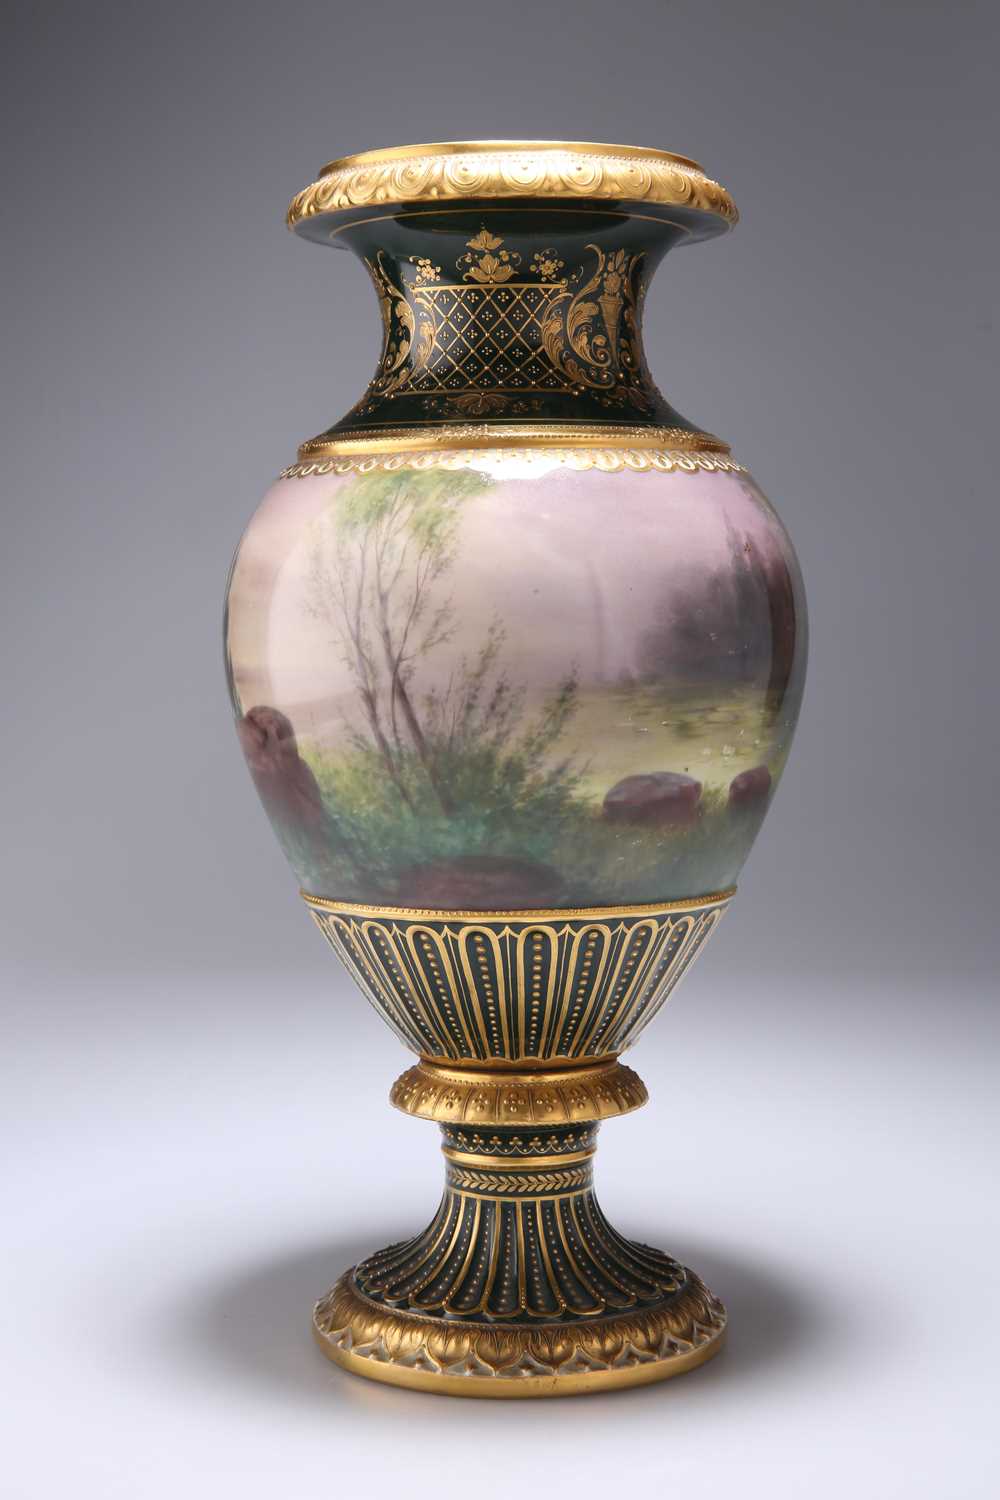 A VIENNA VASE BY WAGNER, LATE 19TH CENTURY - Image 2 of 2